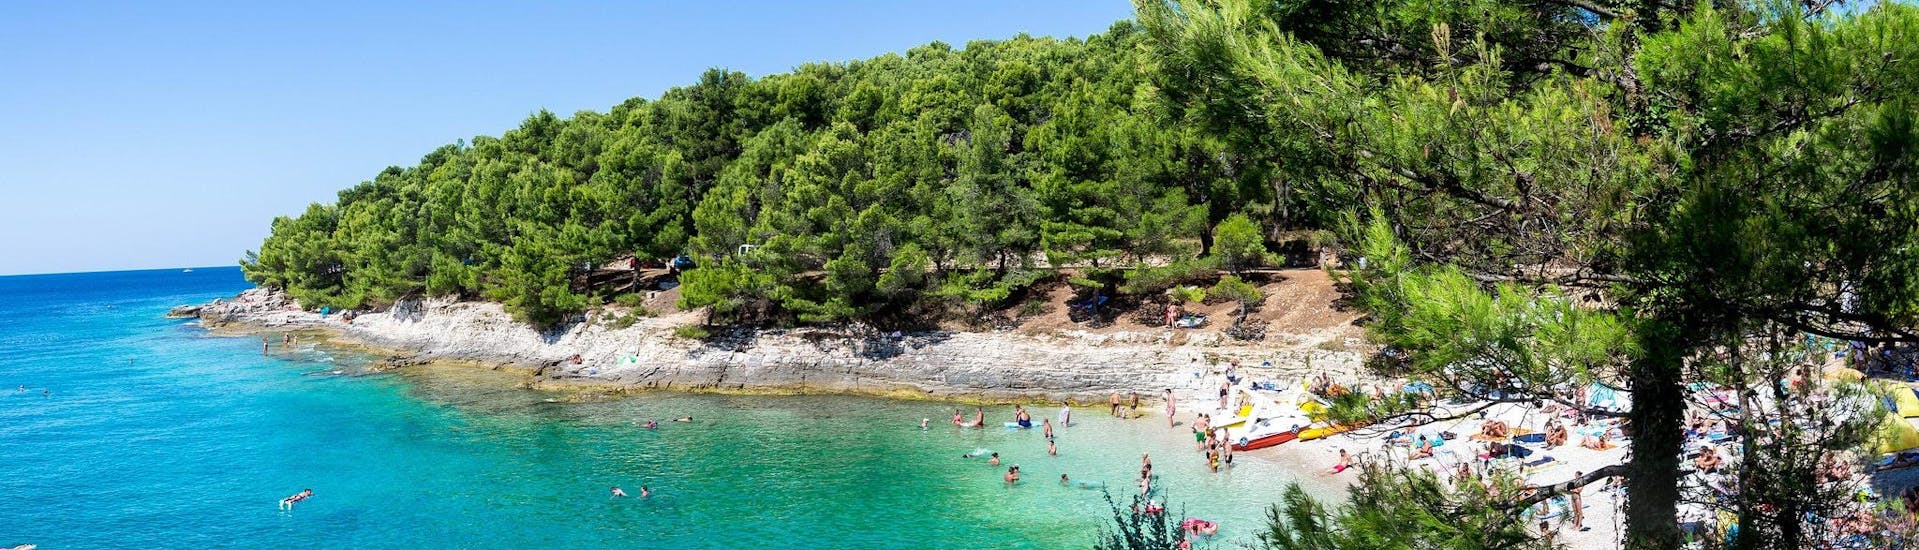 View of the beach at Cape Kamenjak, a popular destination for sea kayaking in Pula.